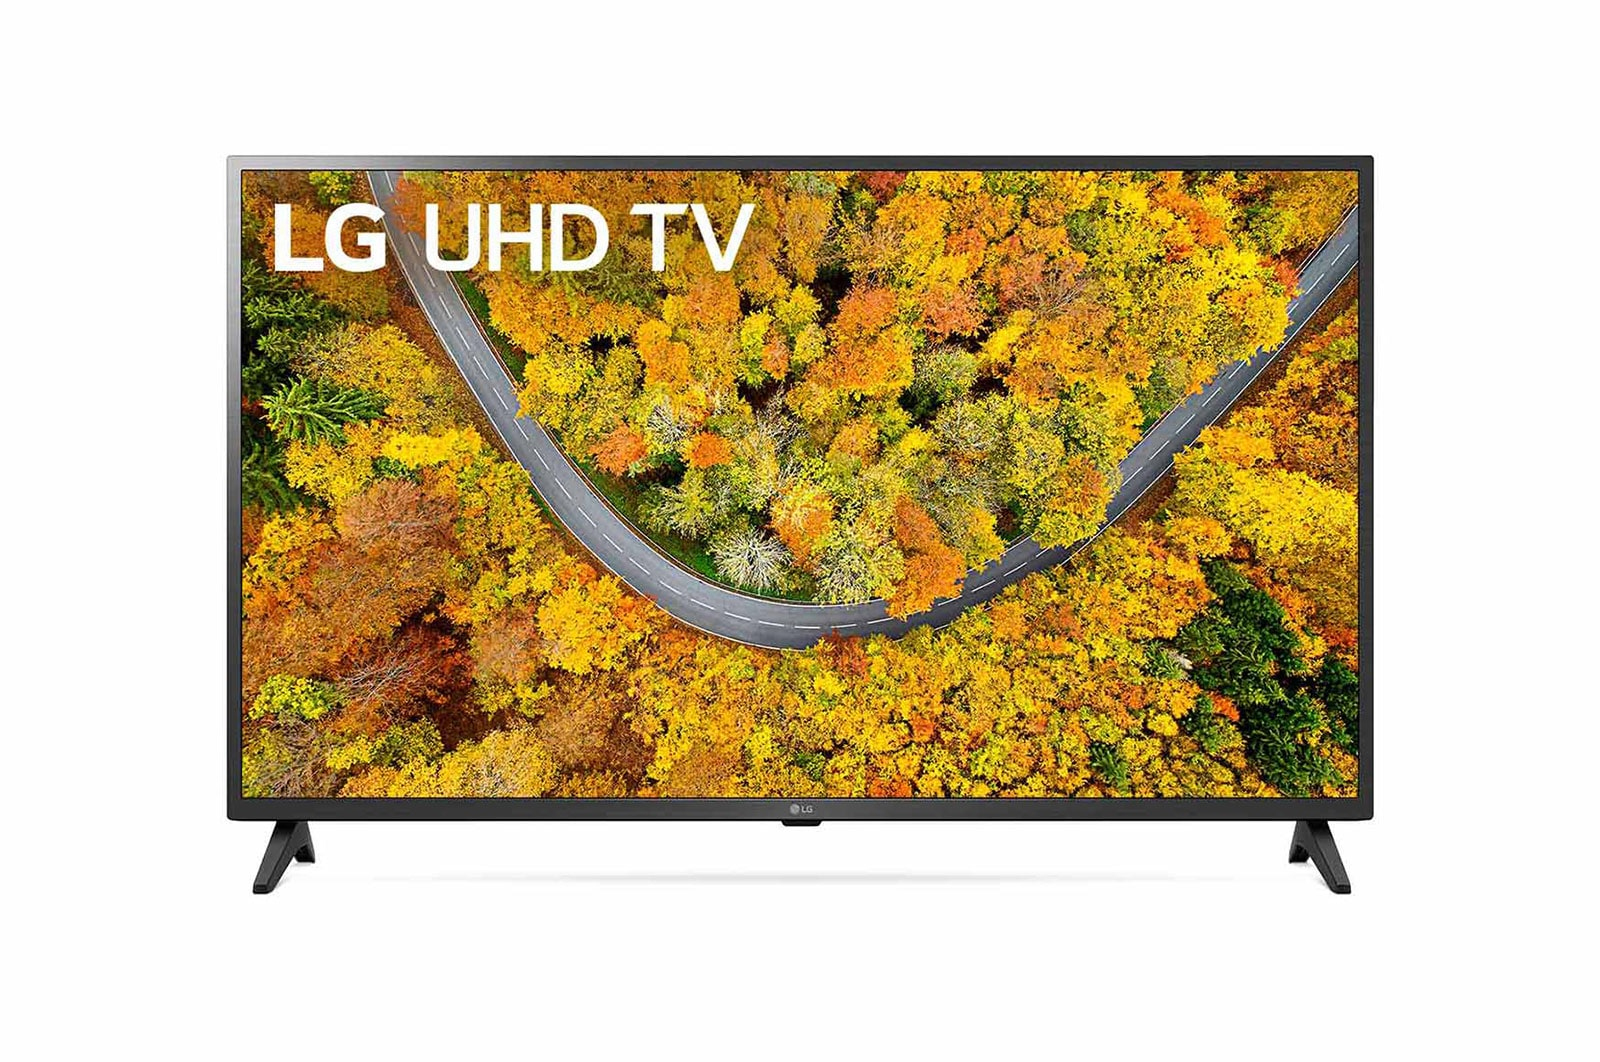 LG 43UP7500PSF TV